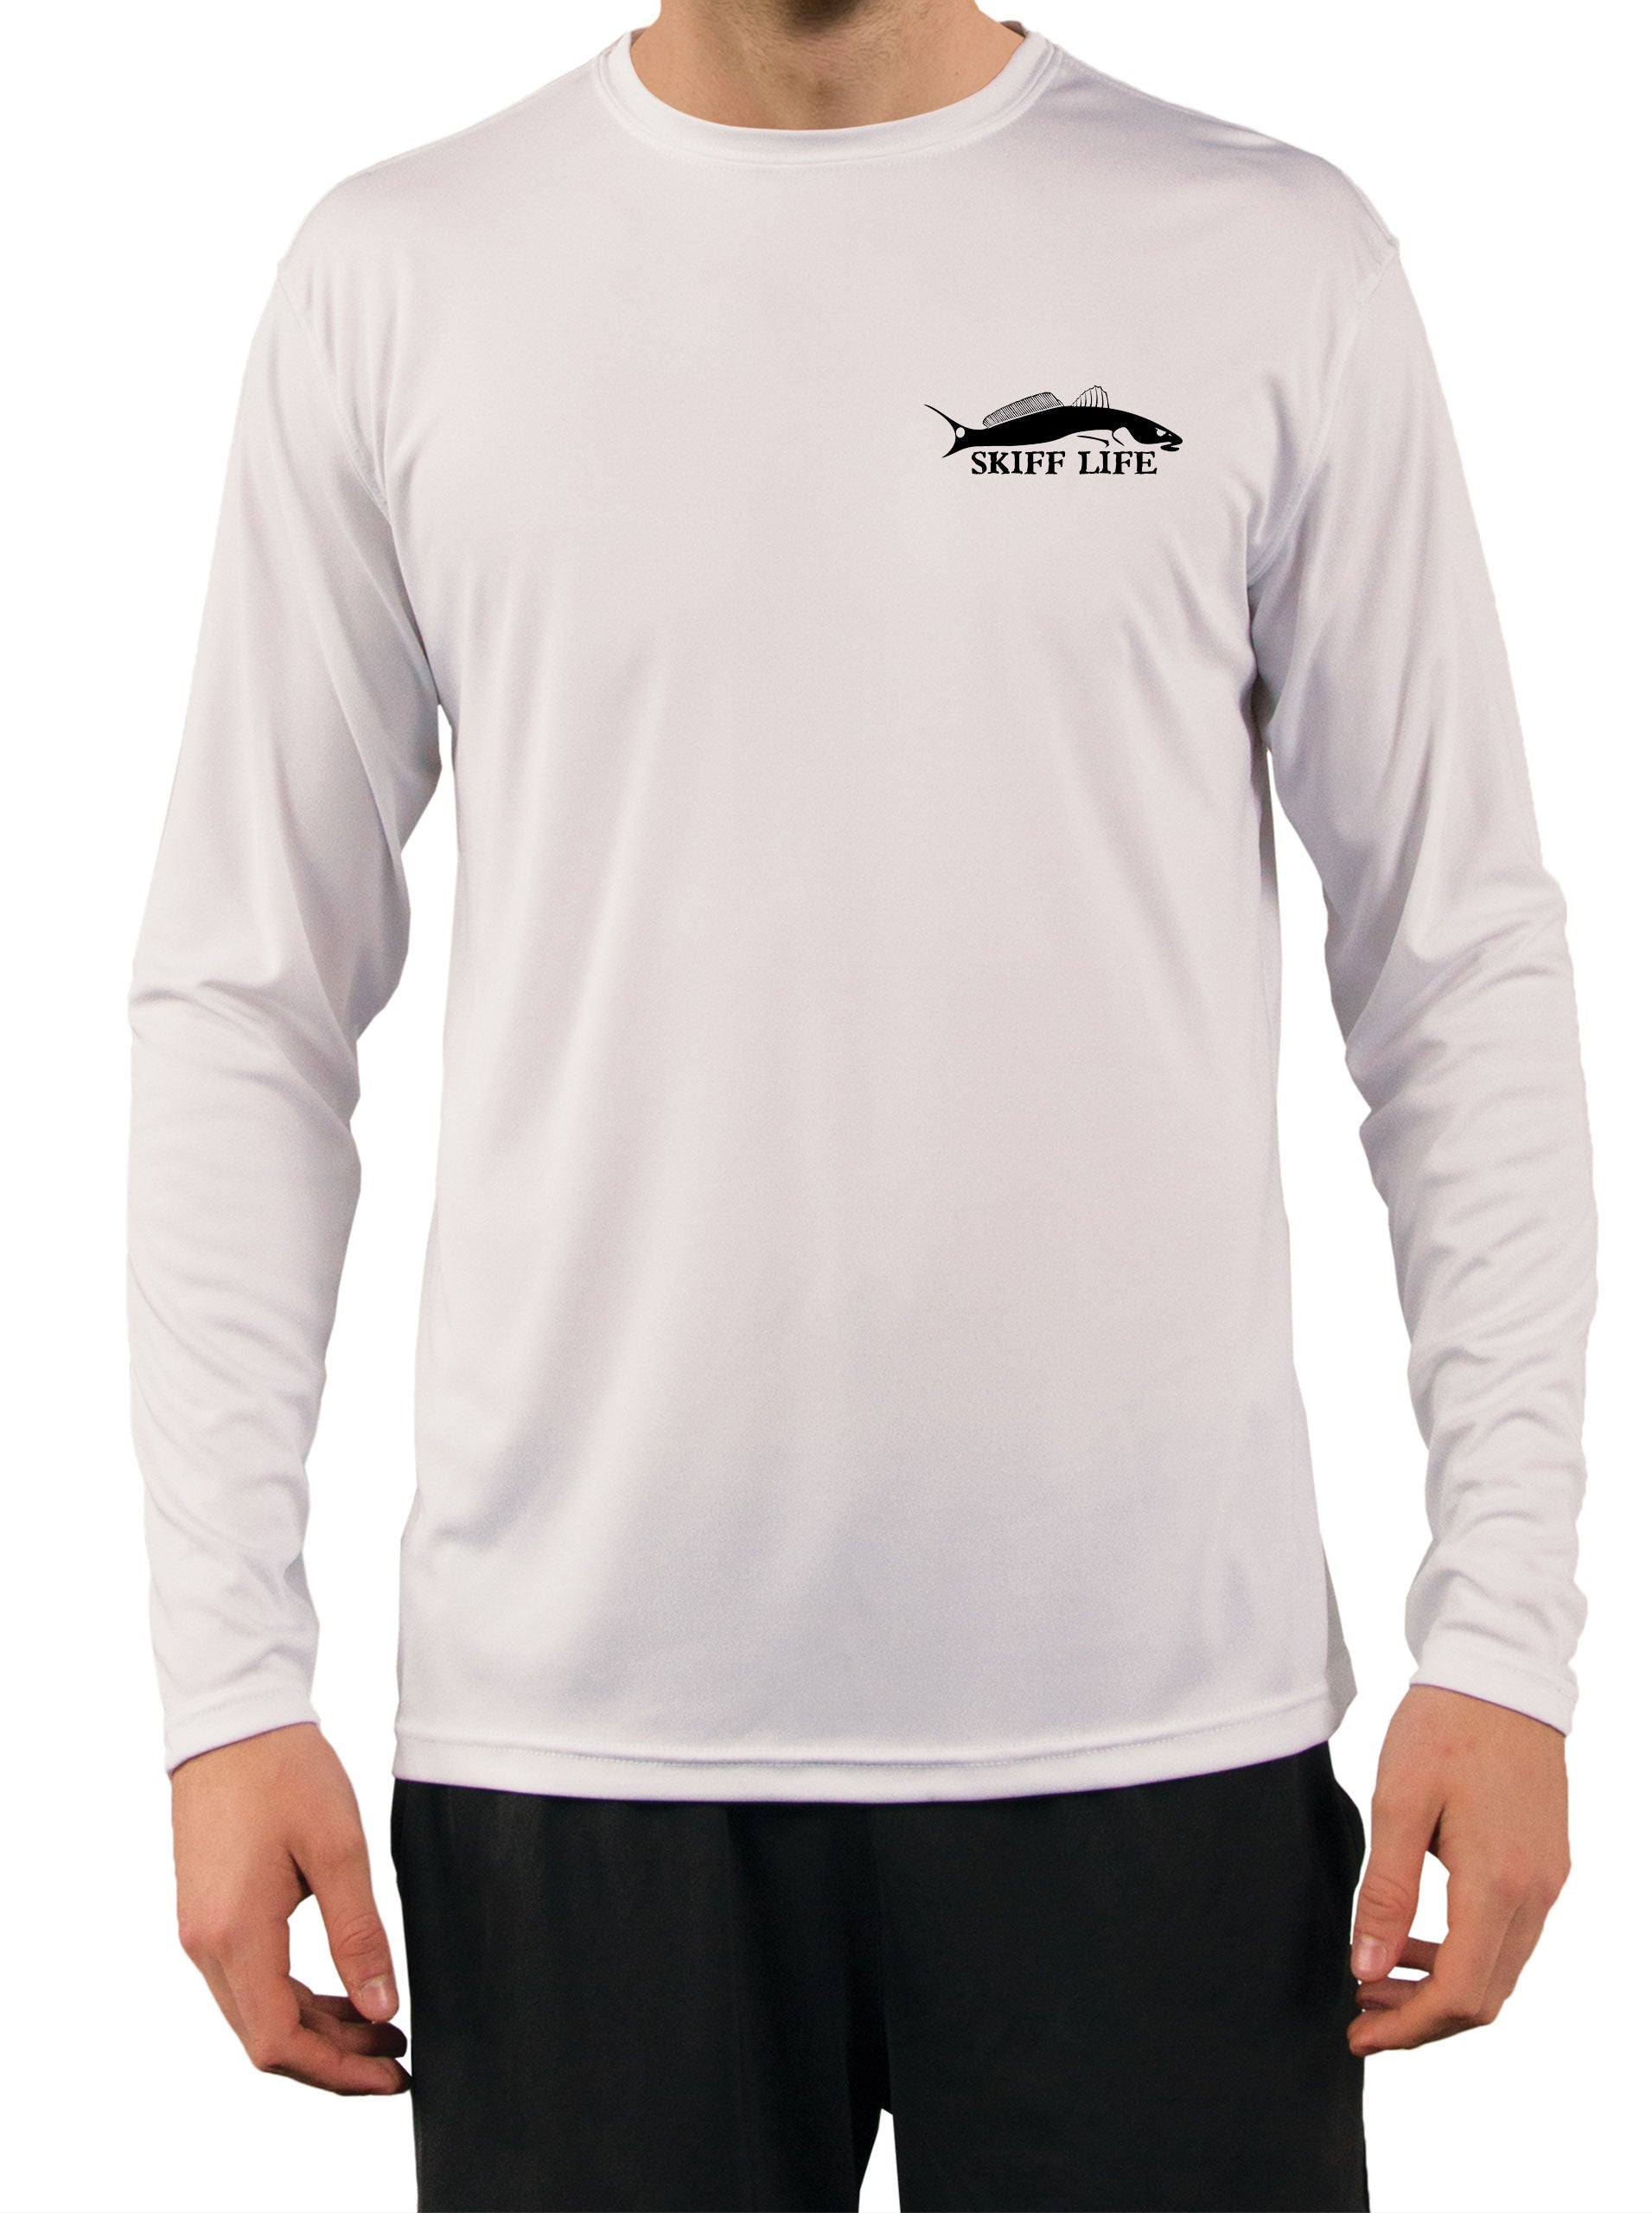 Speckled Trout Fishing Shirts for Men Skiff Inshore - UV Protected